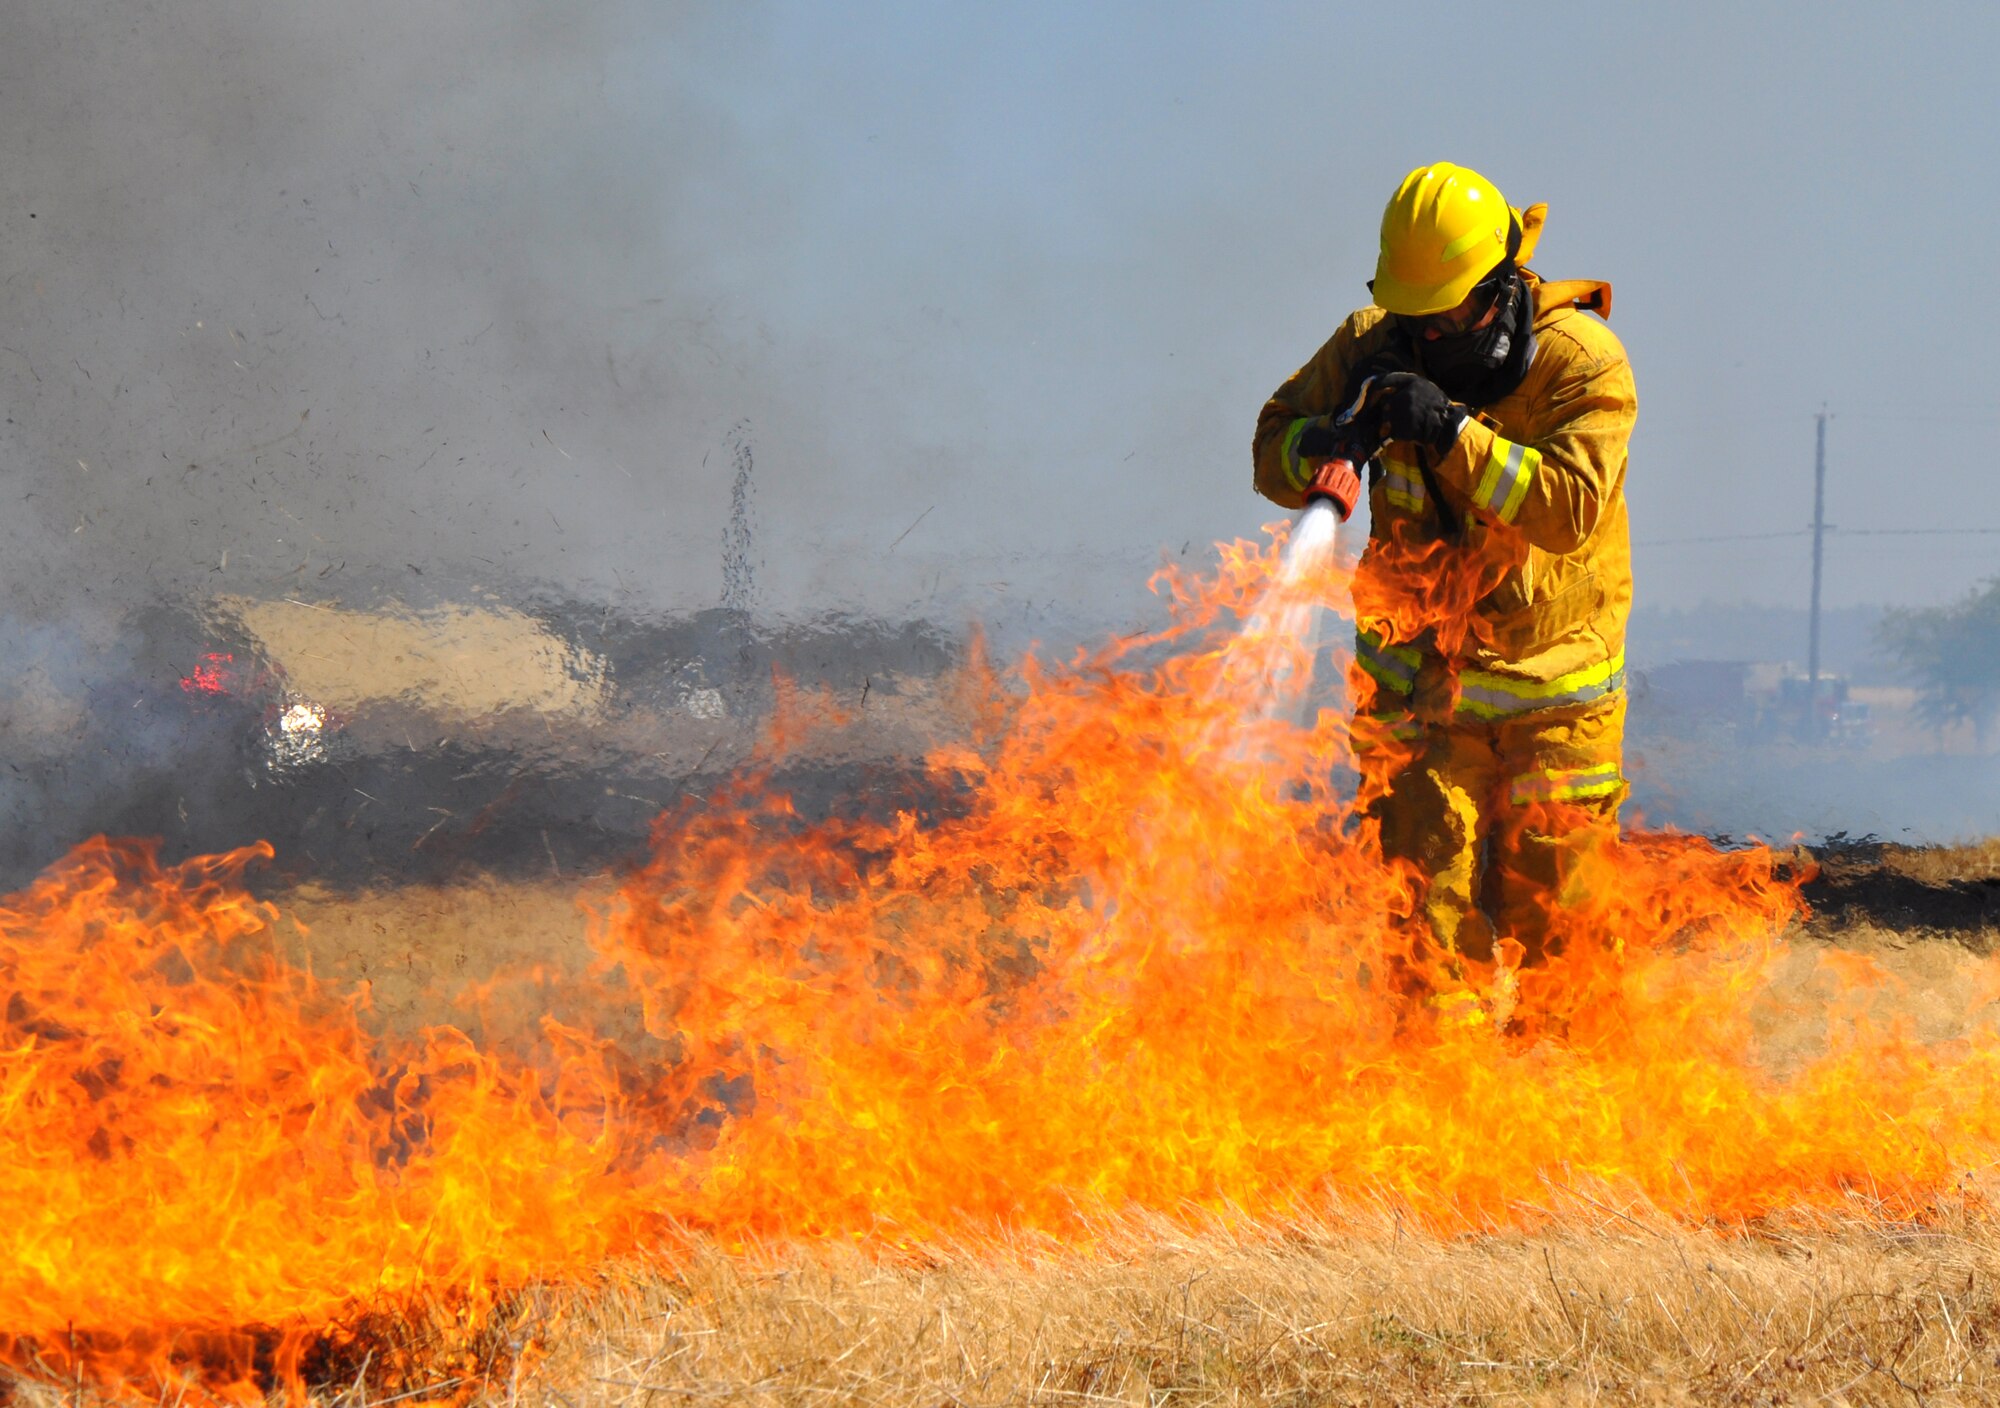 A U.S. Air Force firefighter extinguishes flames from a grass fire at Beale Air Force Base, Calif., Sept. 13, 2012. Beale firemen wear protective suites to shield them from heat. (U.S. Air Force photo by Staff Sgt. Robert M. Trujillo/Released)